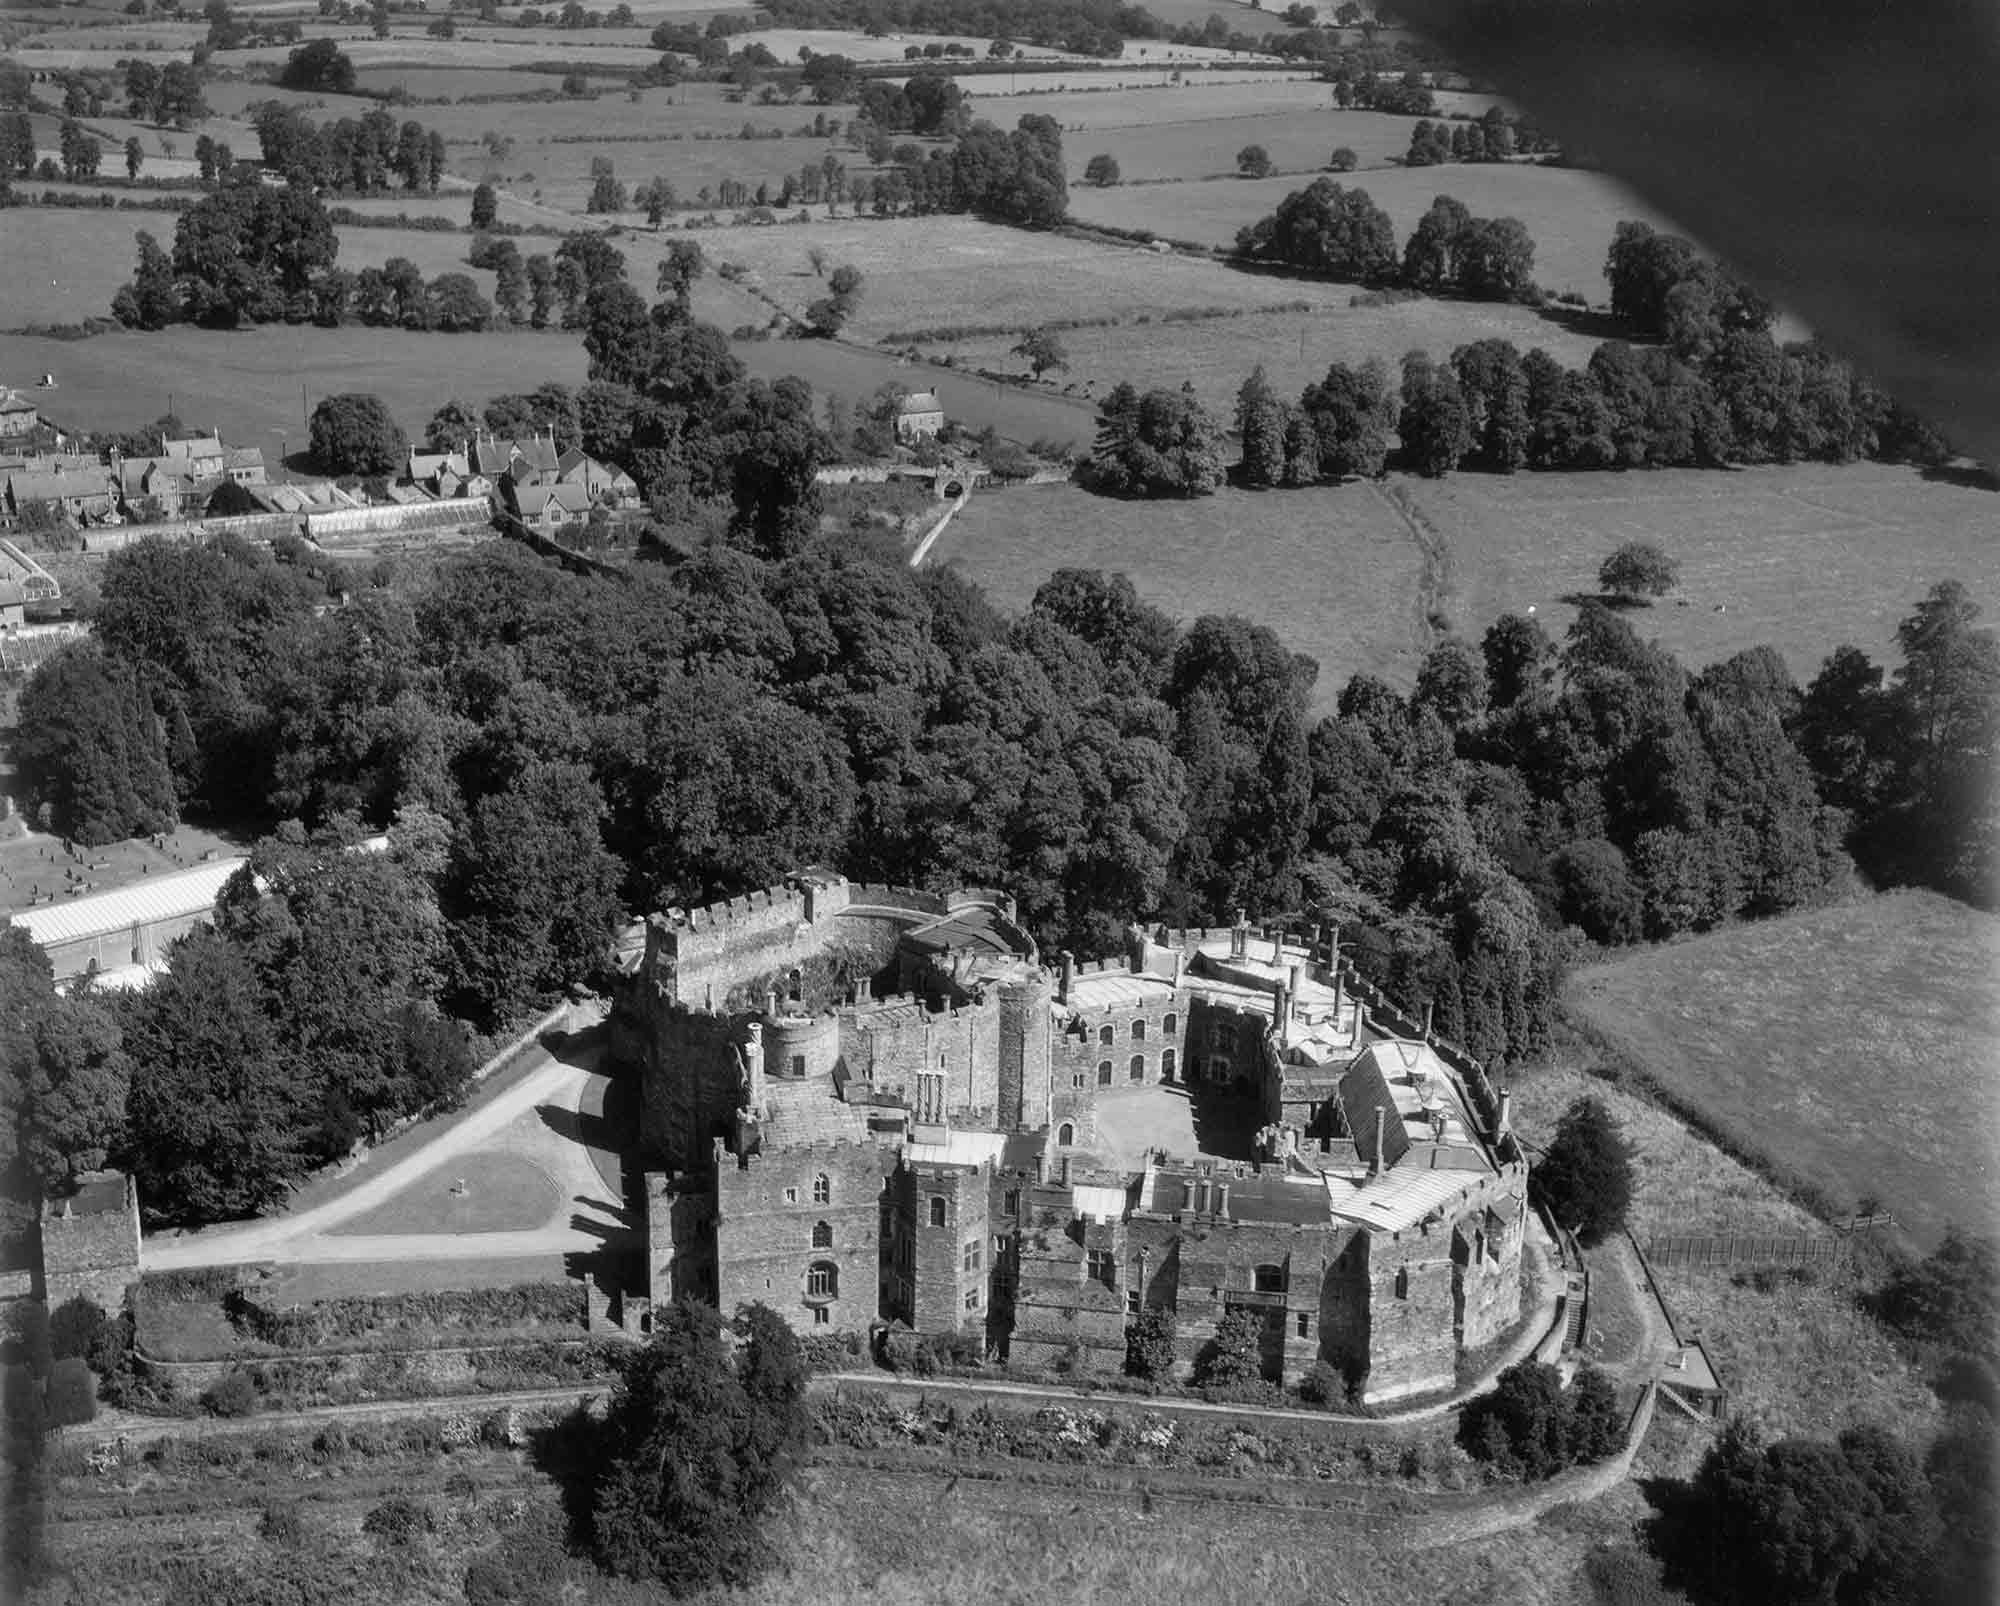 Black and white oblique aerial photograph featuring in the foreground a stone castle with crenelated walls and inner and outer courtyards. Tall trees extend across the centre of the photograph. Adjacent to the castle and stretching beyond the trees are fields bounded by hedges and clusters of trees. In the left middle distance are houses, gardens and a narrow bridge.